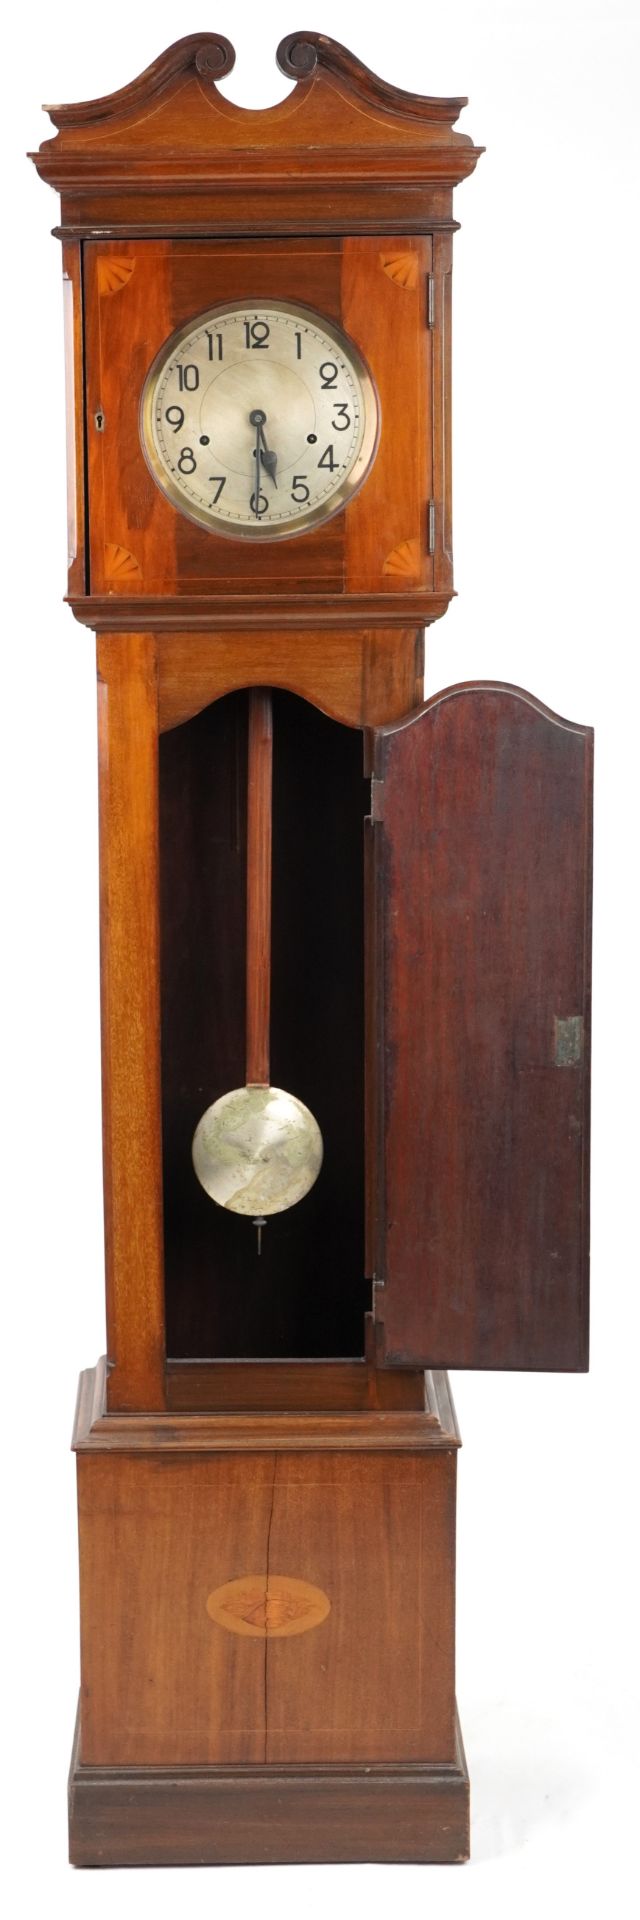 19th century inlaid mahogany cased grandmother clock with silvered dial having Arabic numerals, - Image 2 of 3